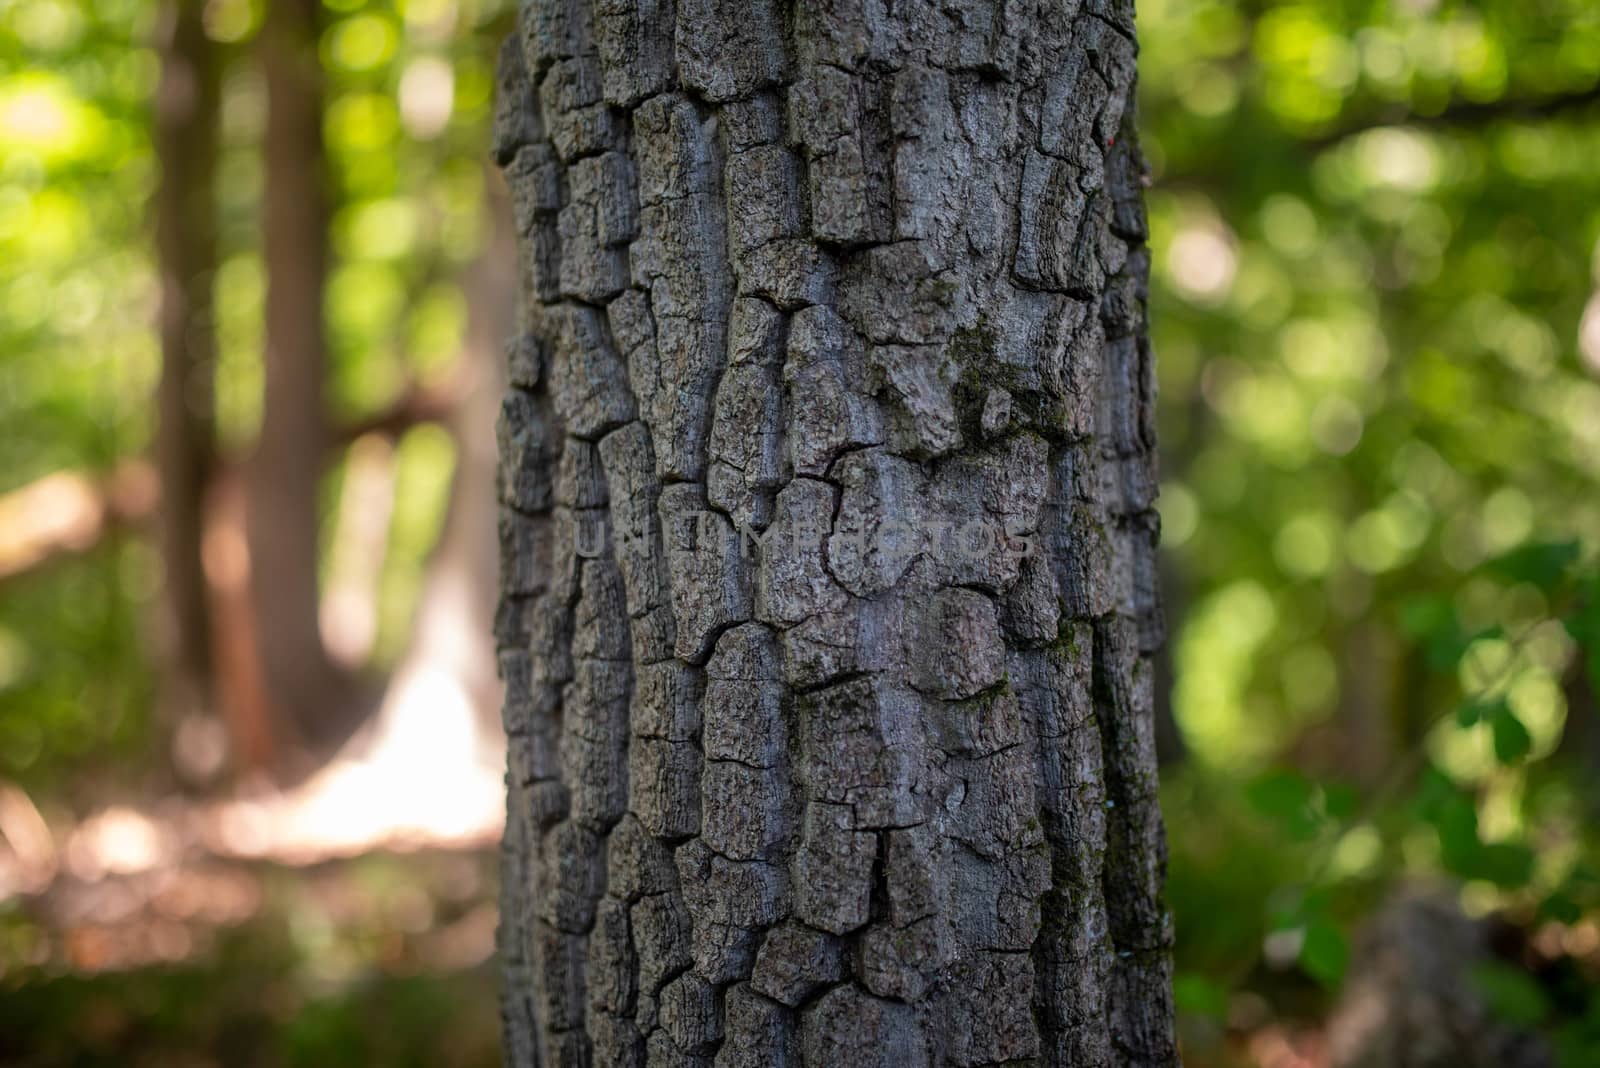 Full frame woodland scene with green defocused background and close up of rough tree trunk with textured bark. Natural dappled light withe copy space.